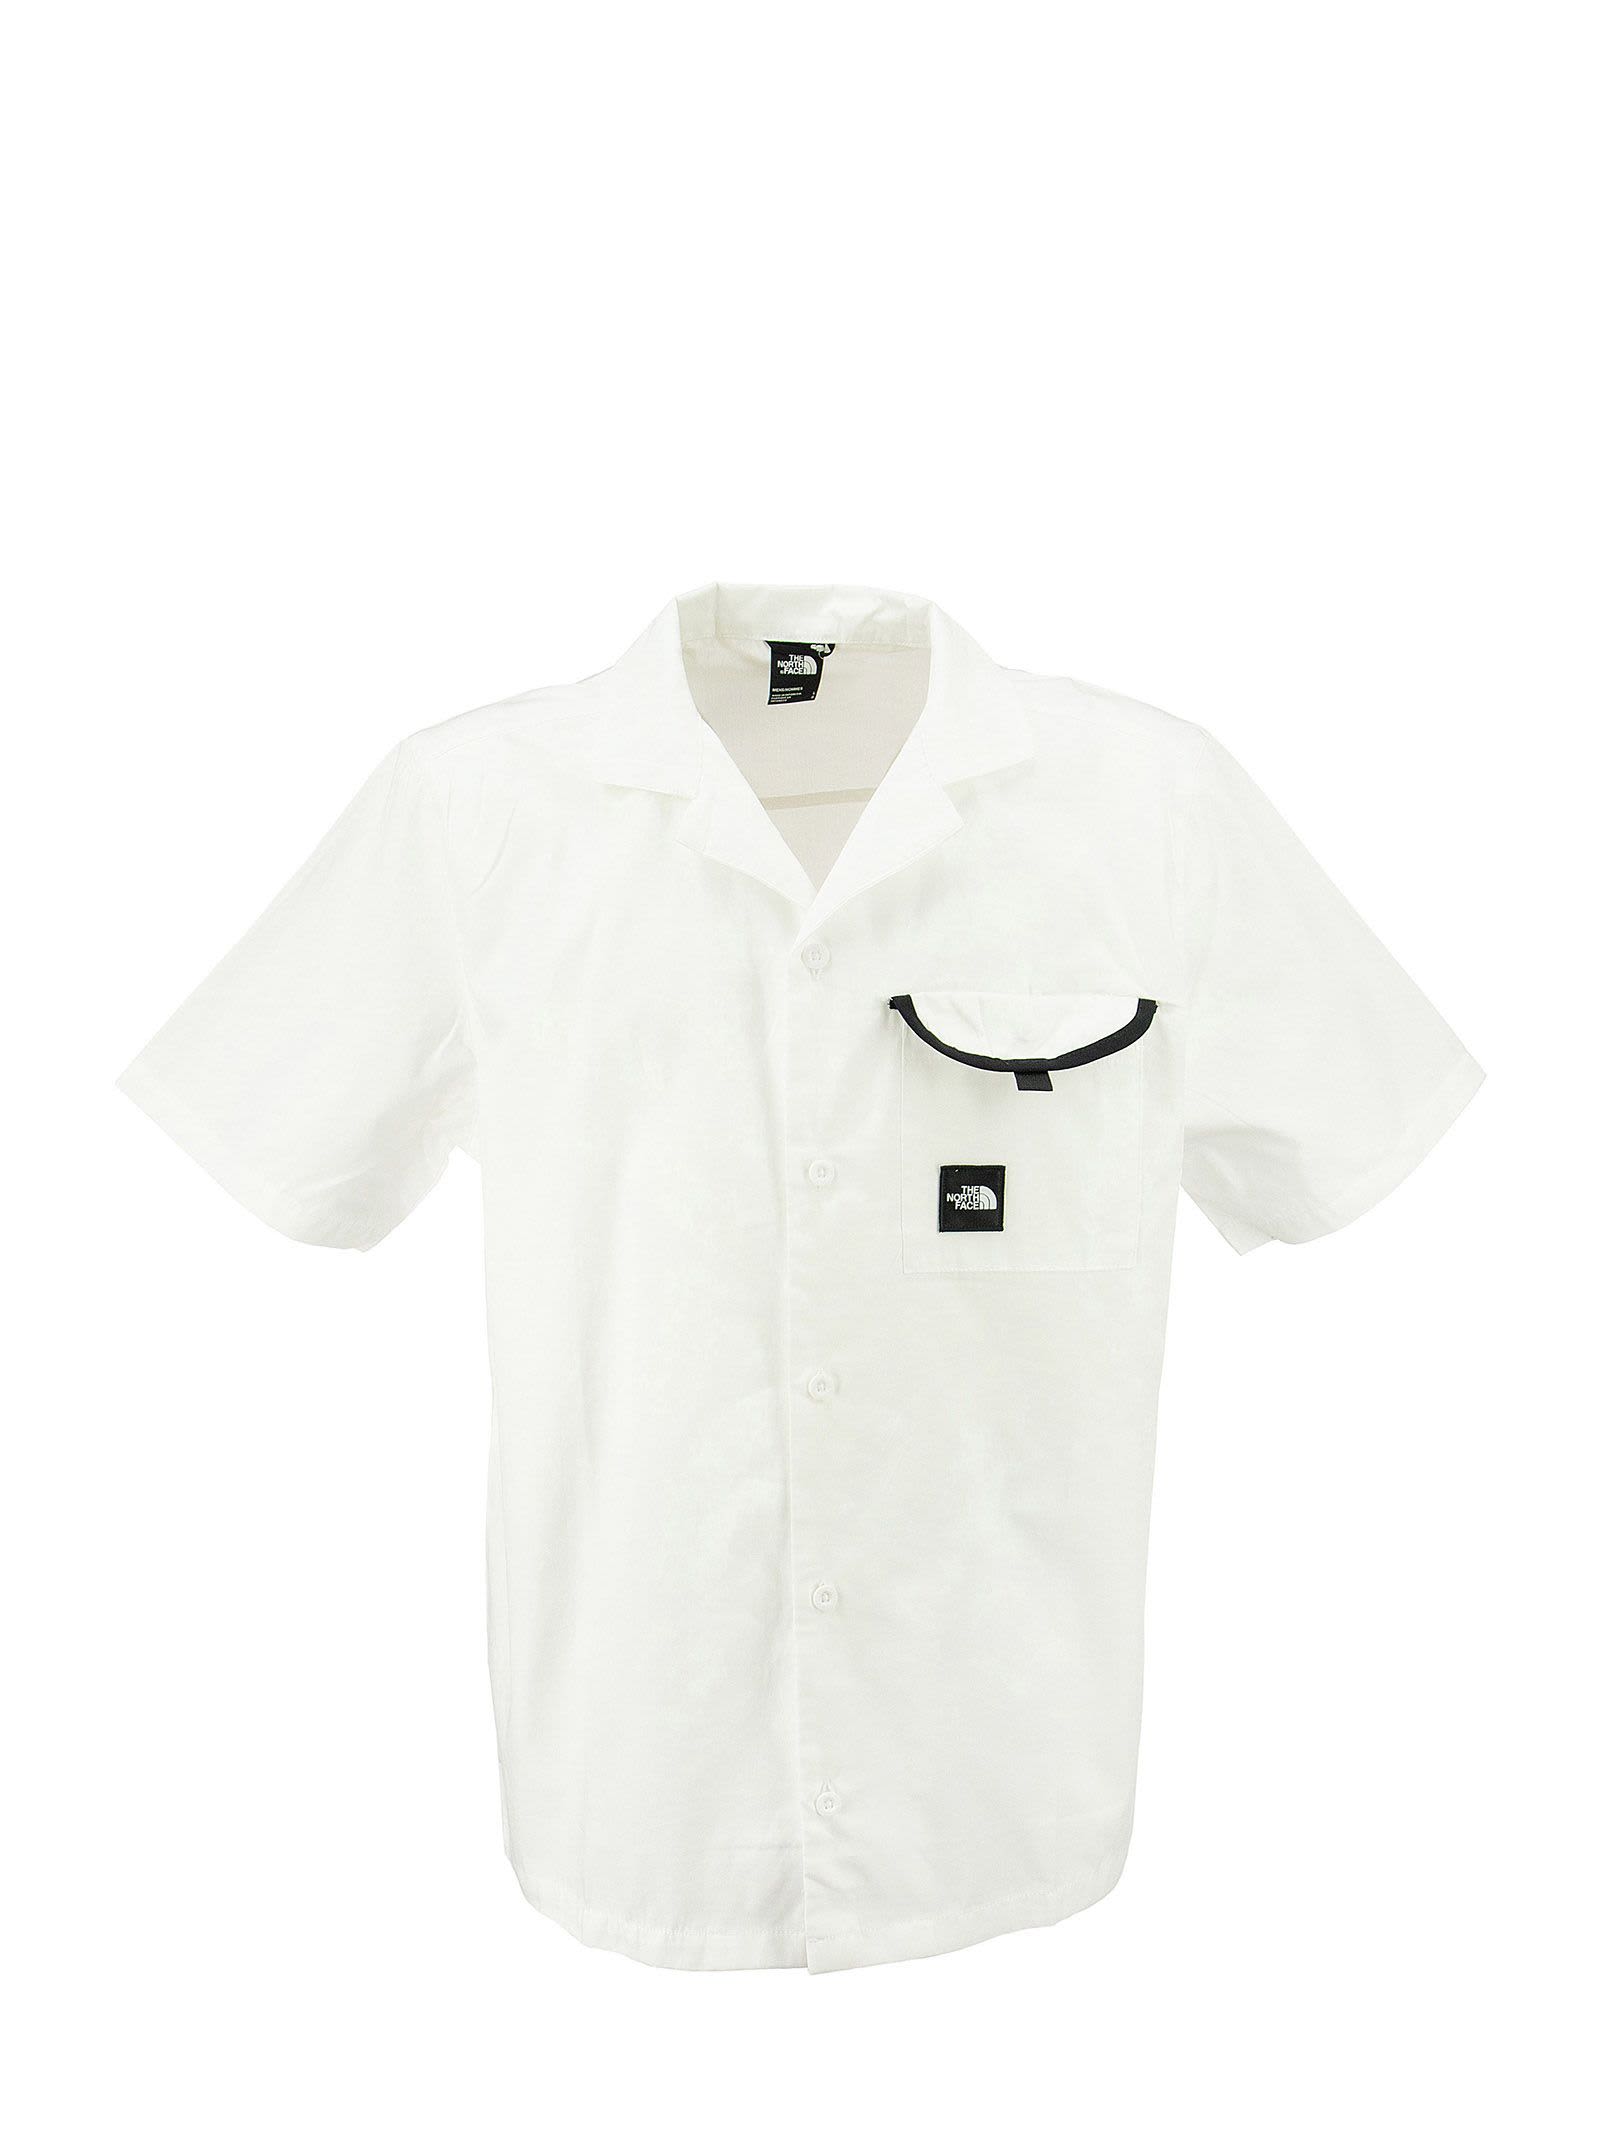 THE NORTH FACE BLACK BOX - SHORT SLEEVE SHIRT,NF0A4T23FN4